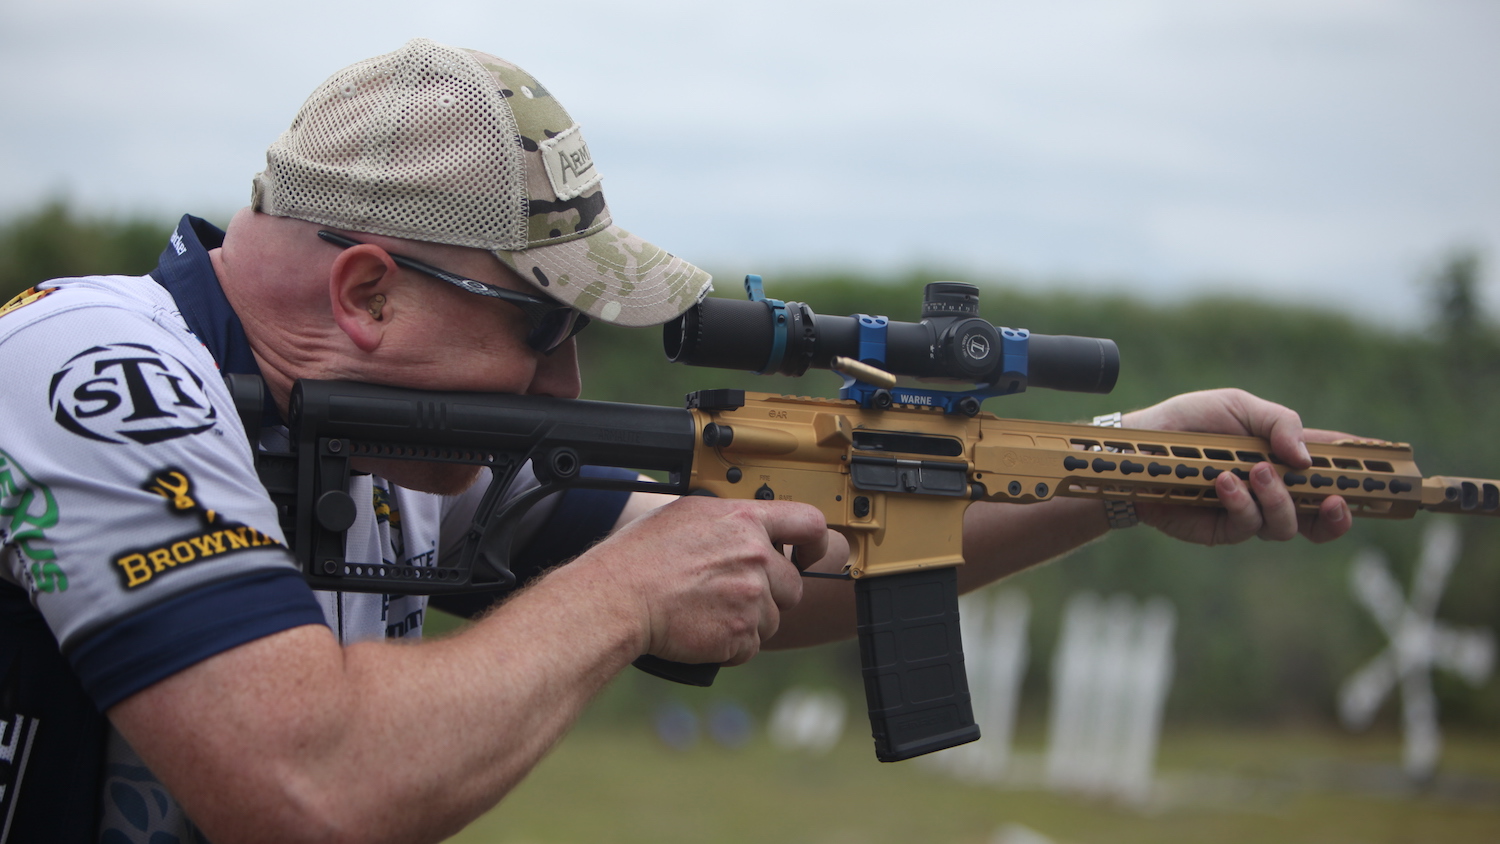 NRA Outdoors Turns 3-Gun Shooters Into Competition Champions